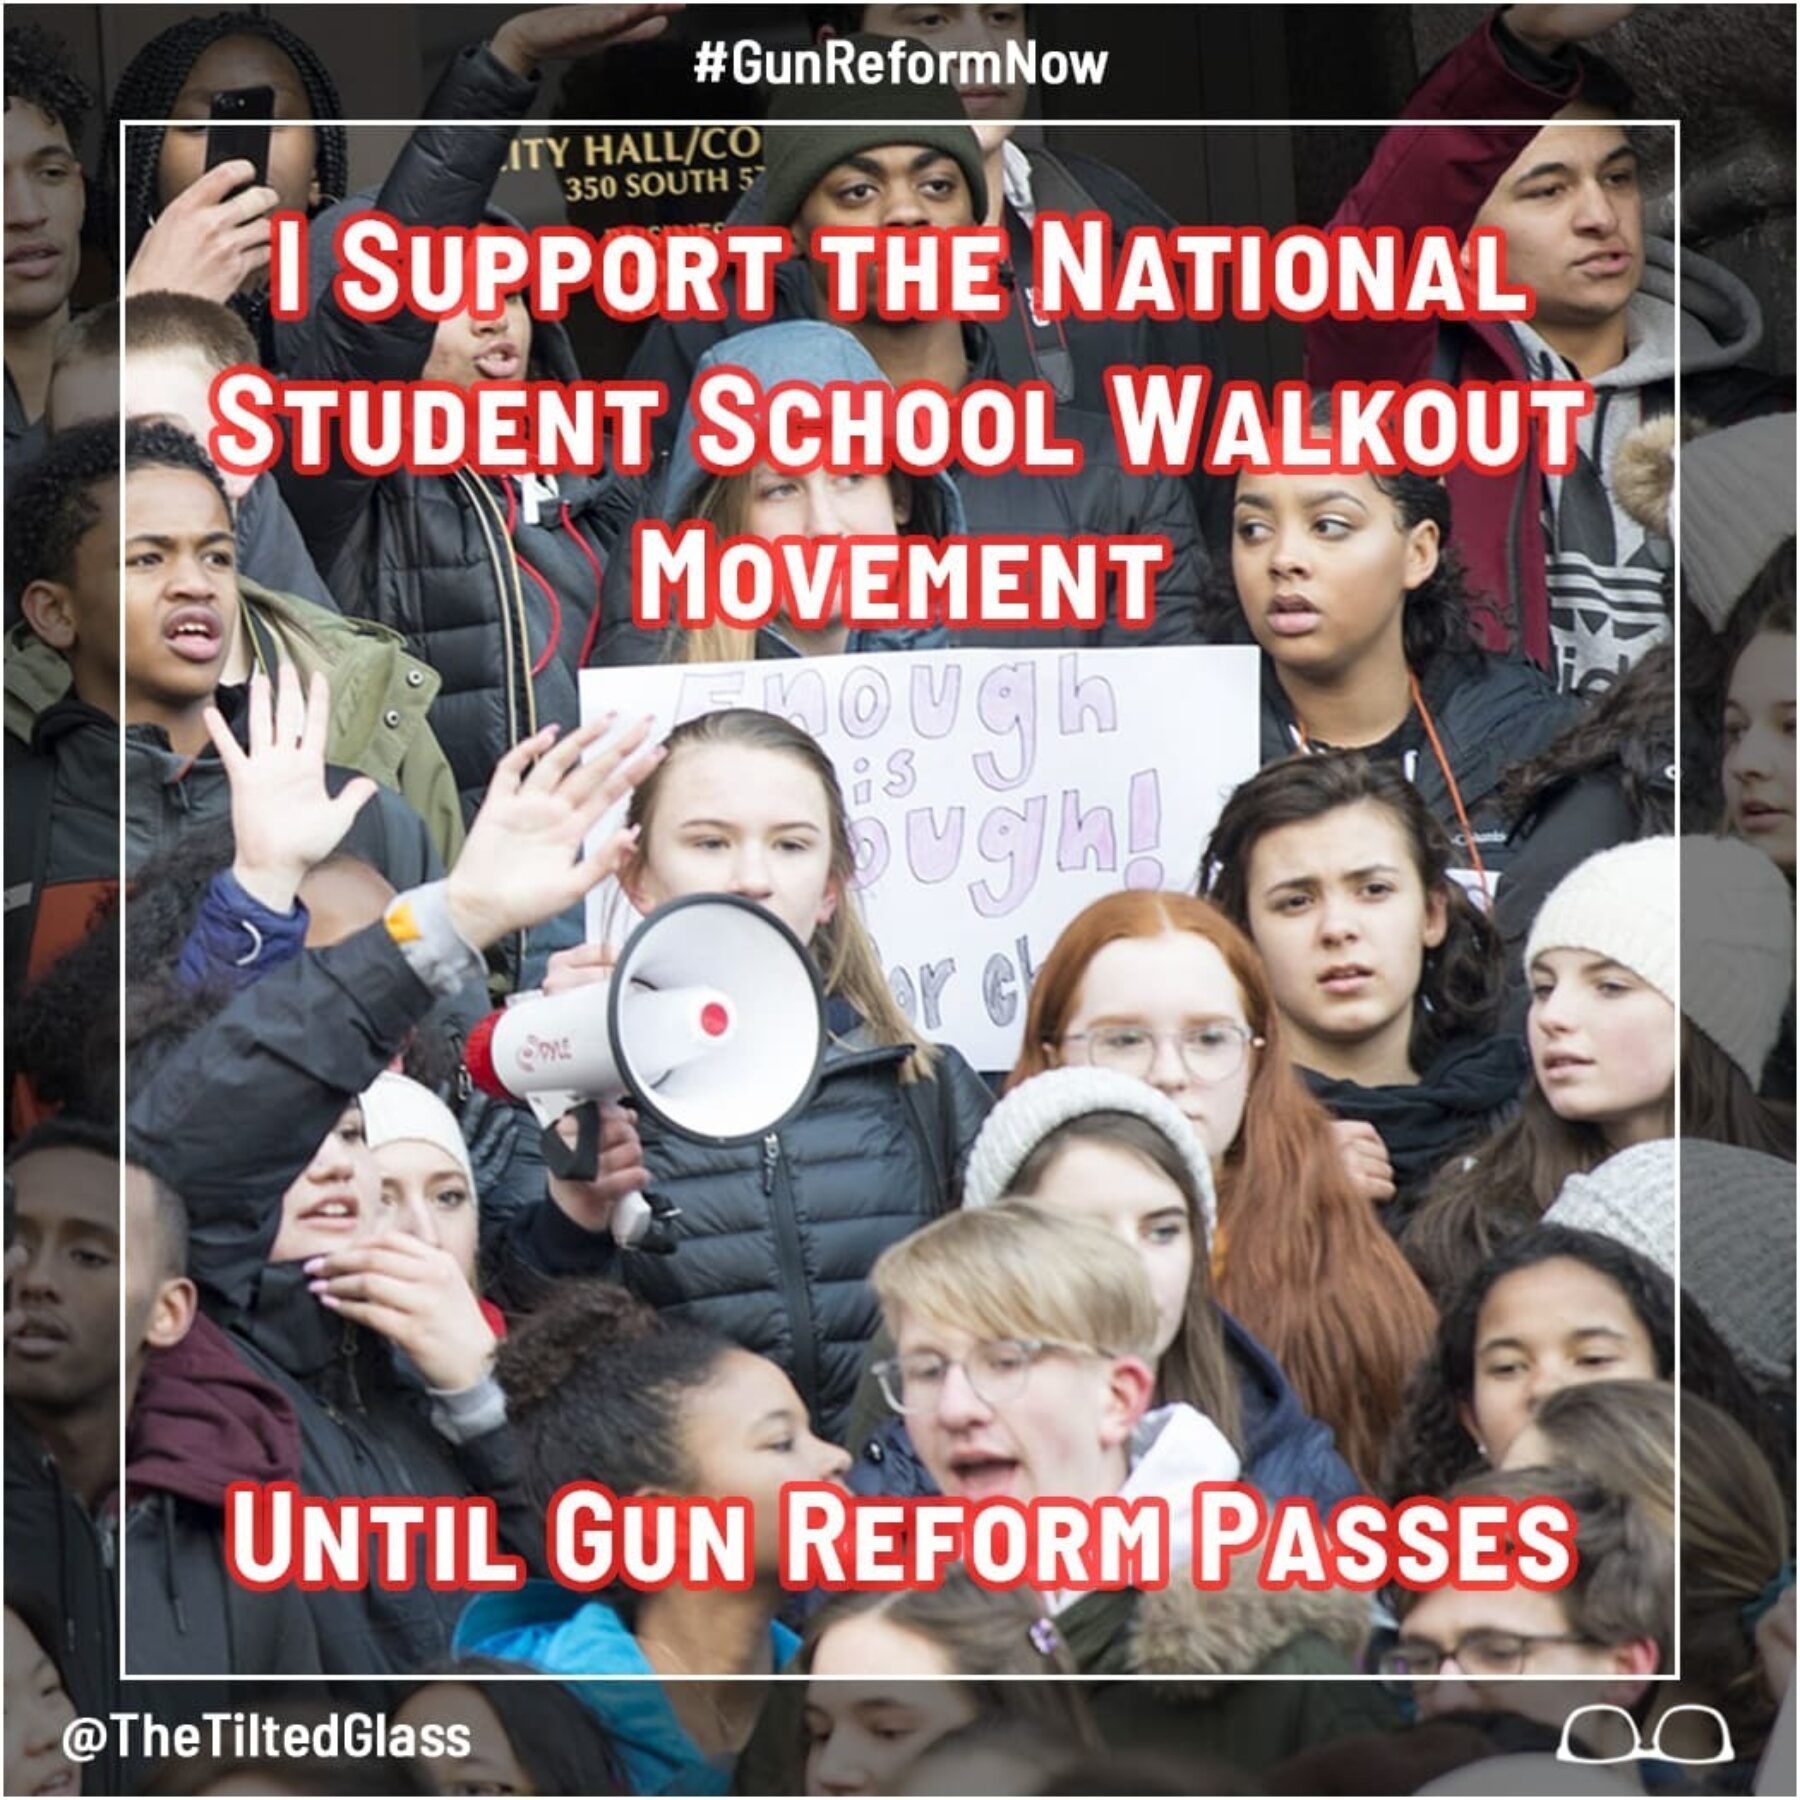 I Support the National Student School Walkout Movement